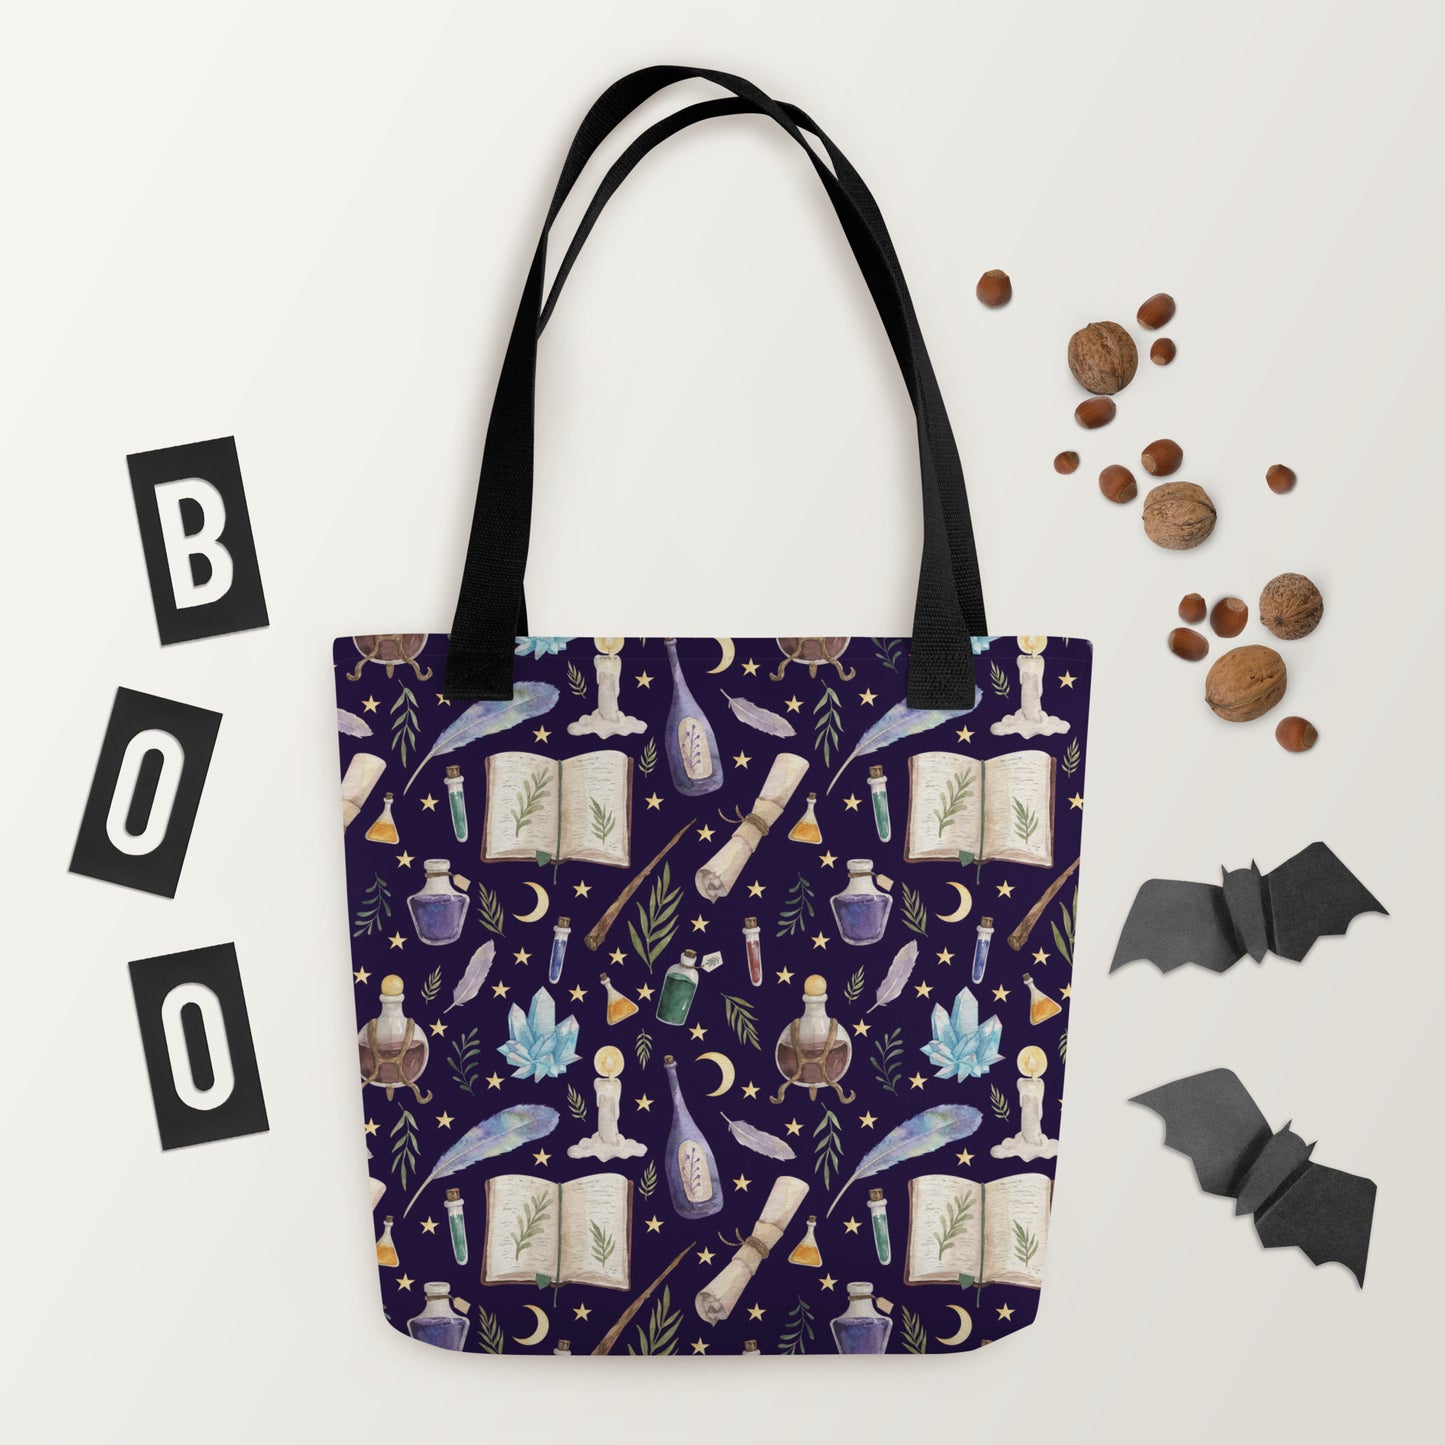 Double Double Toil and Trouble Tote Bag